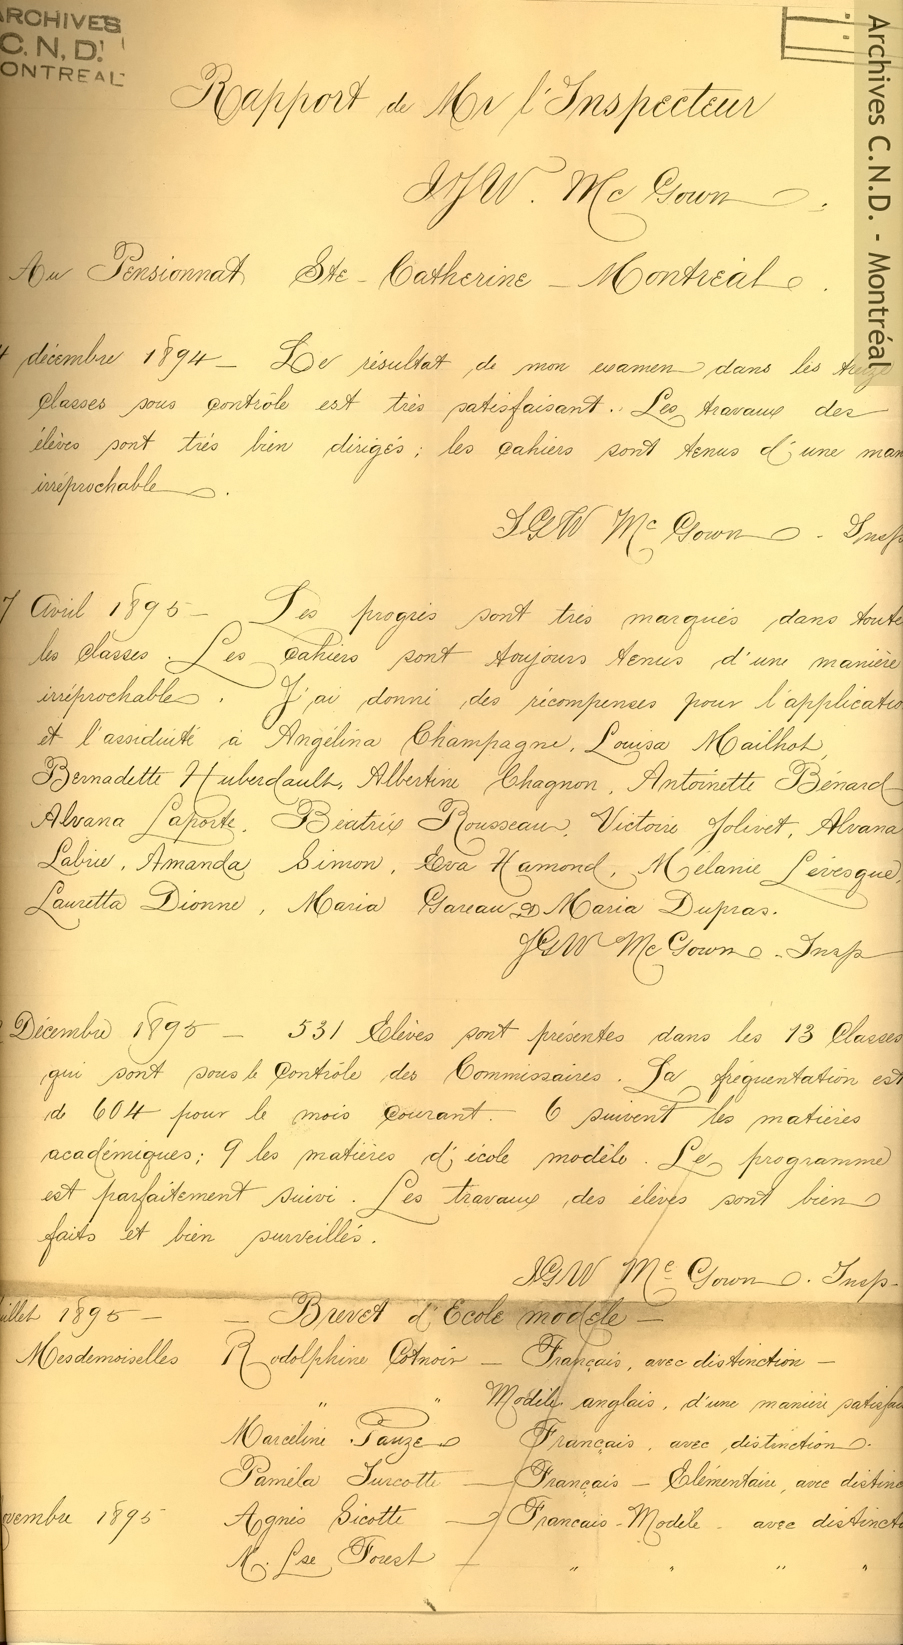 Report from Inspector I.J.W. McGown following a visit to Sainte-Catherine boarding school